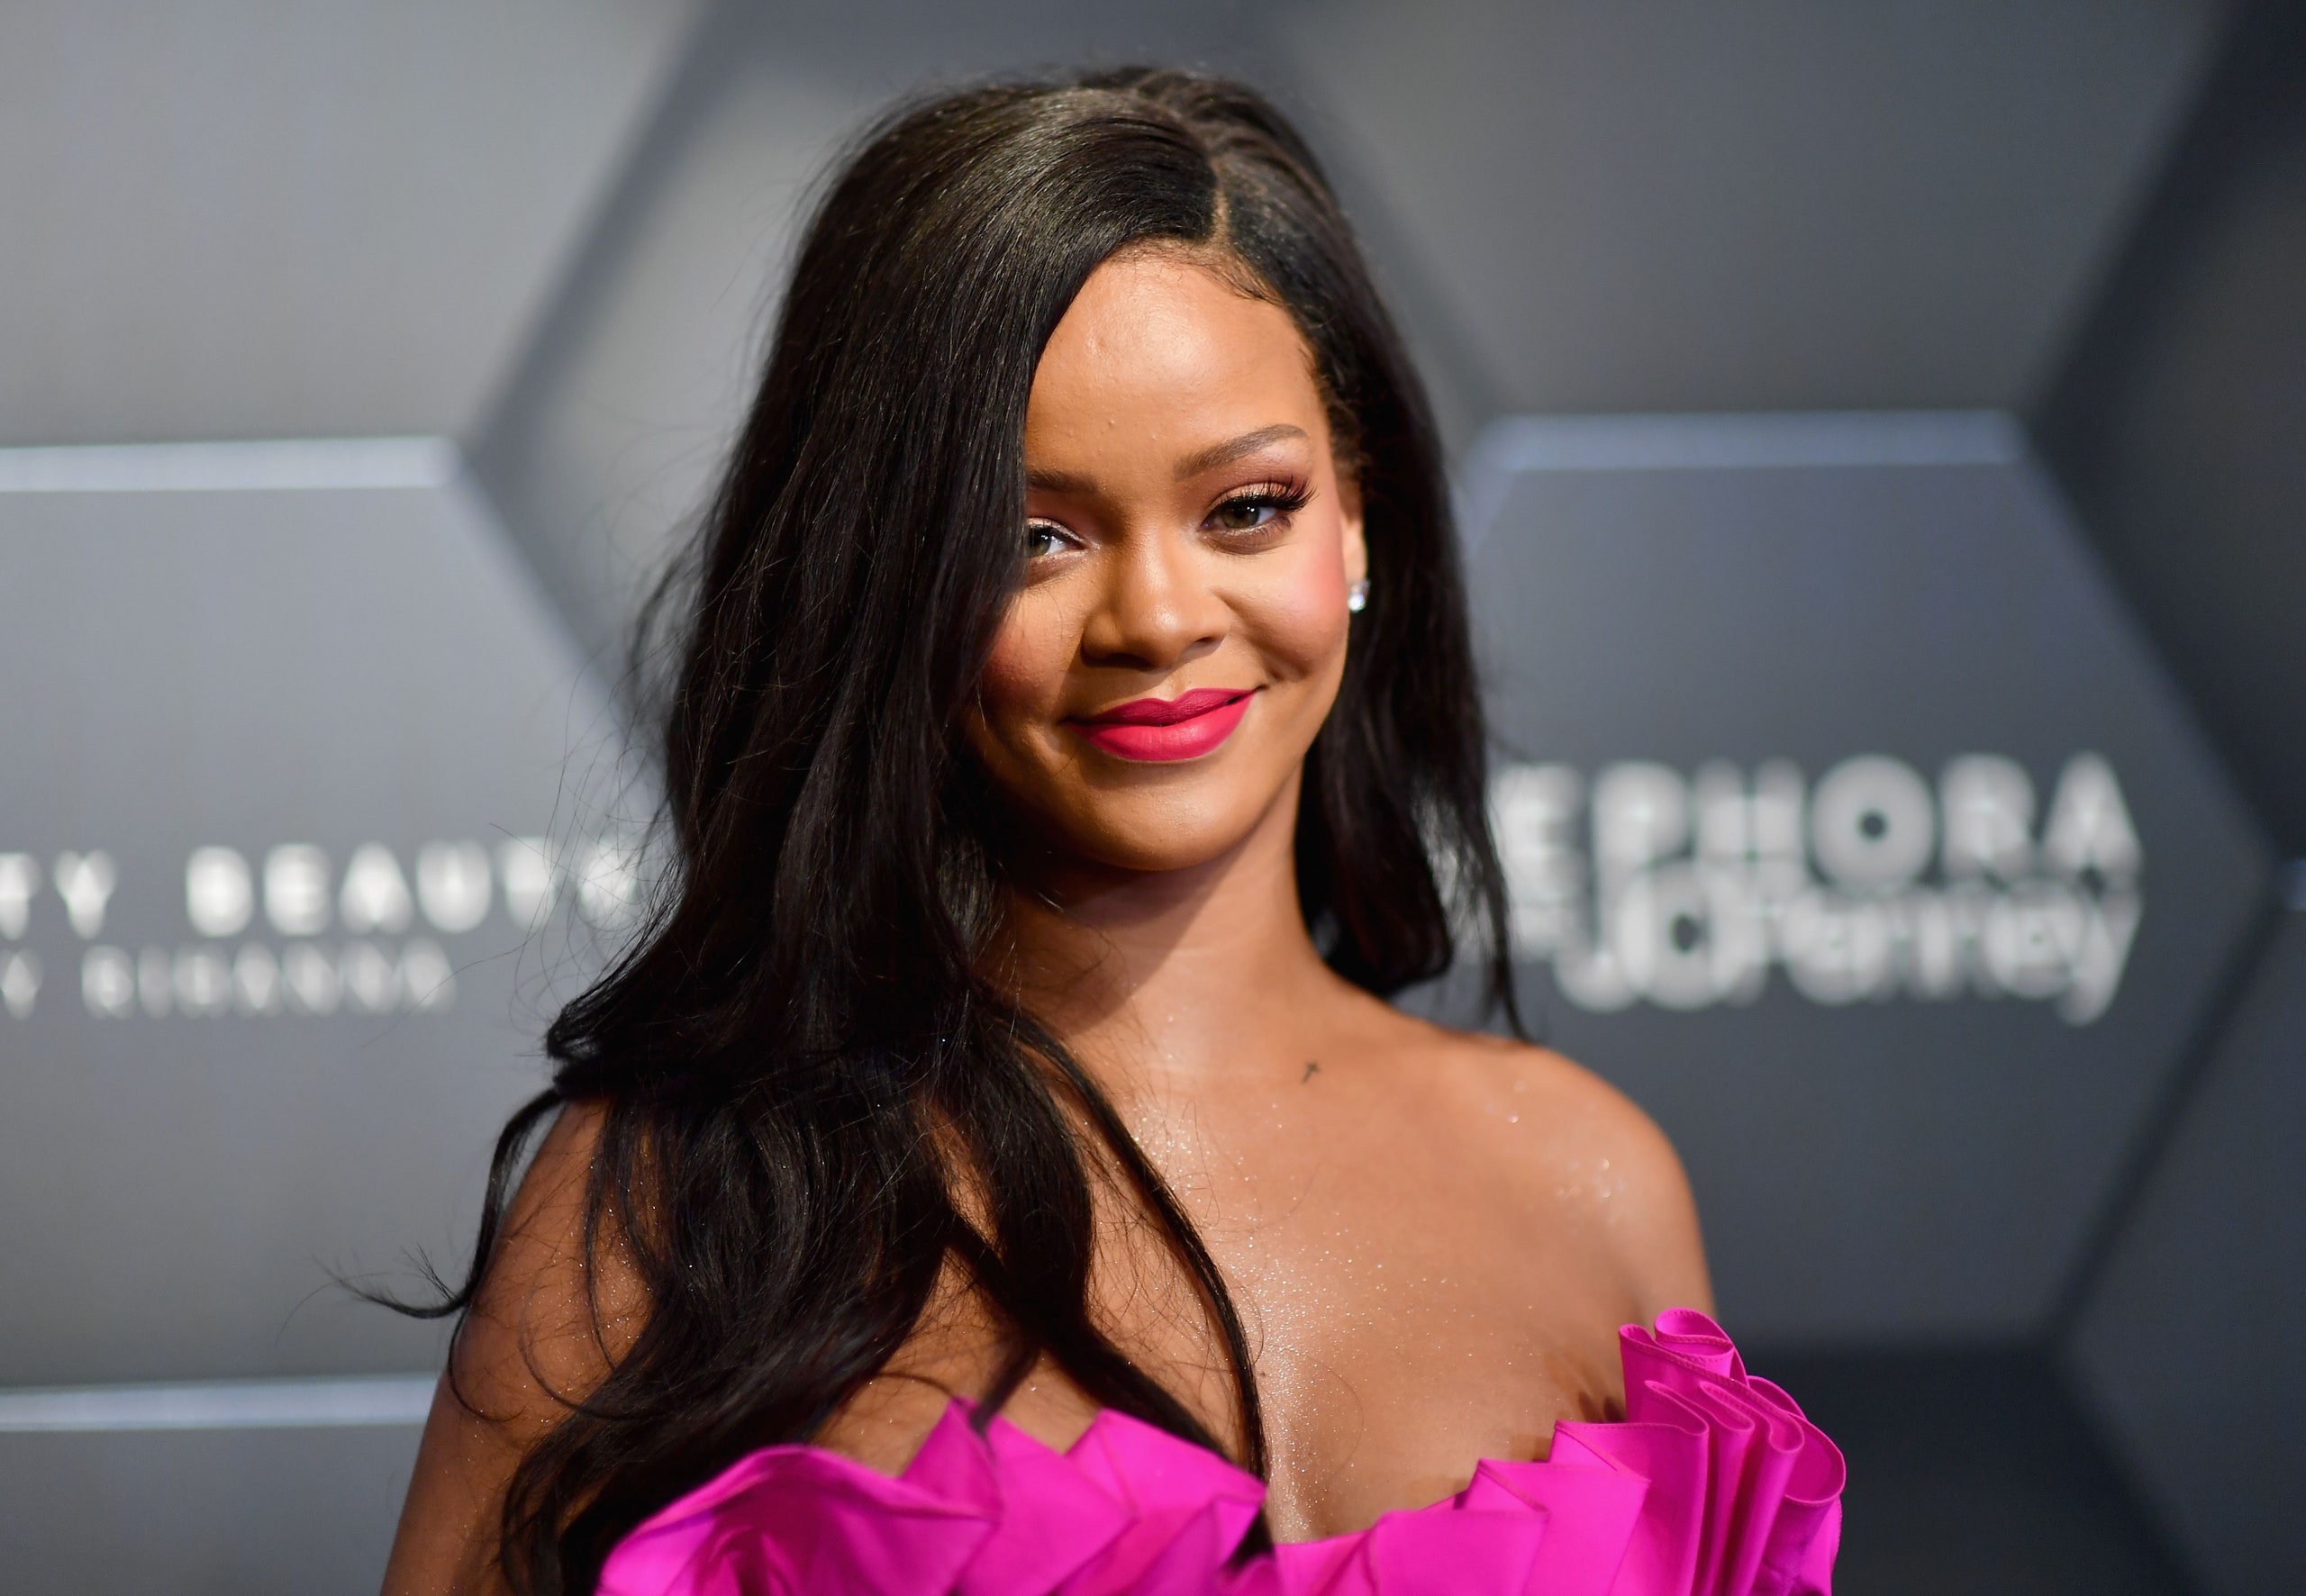 How Rihanna Feels About Being a Billionaire?